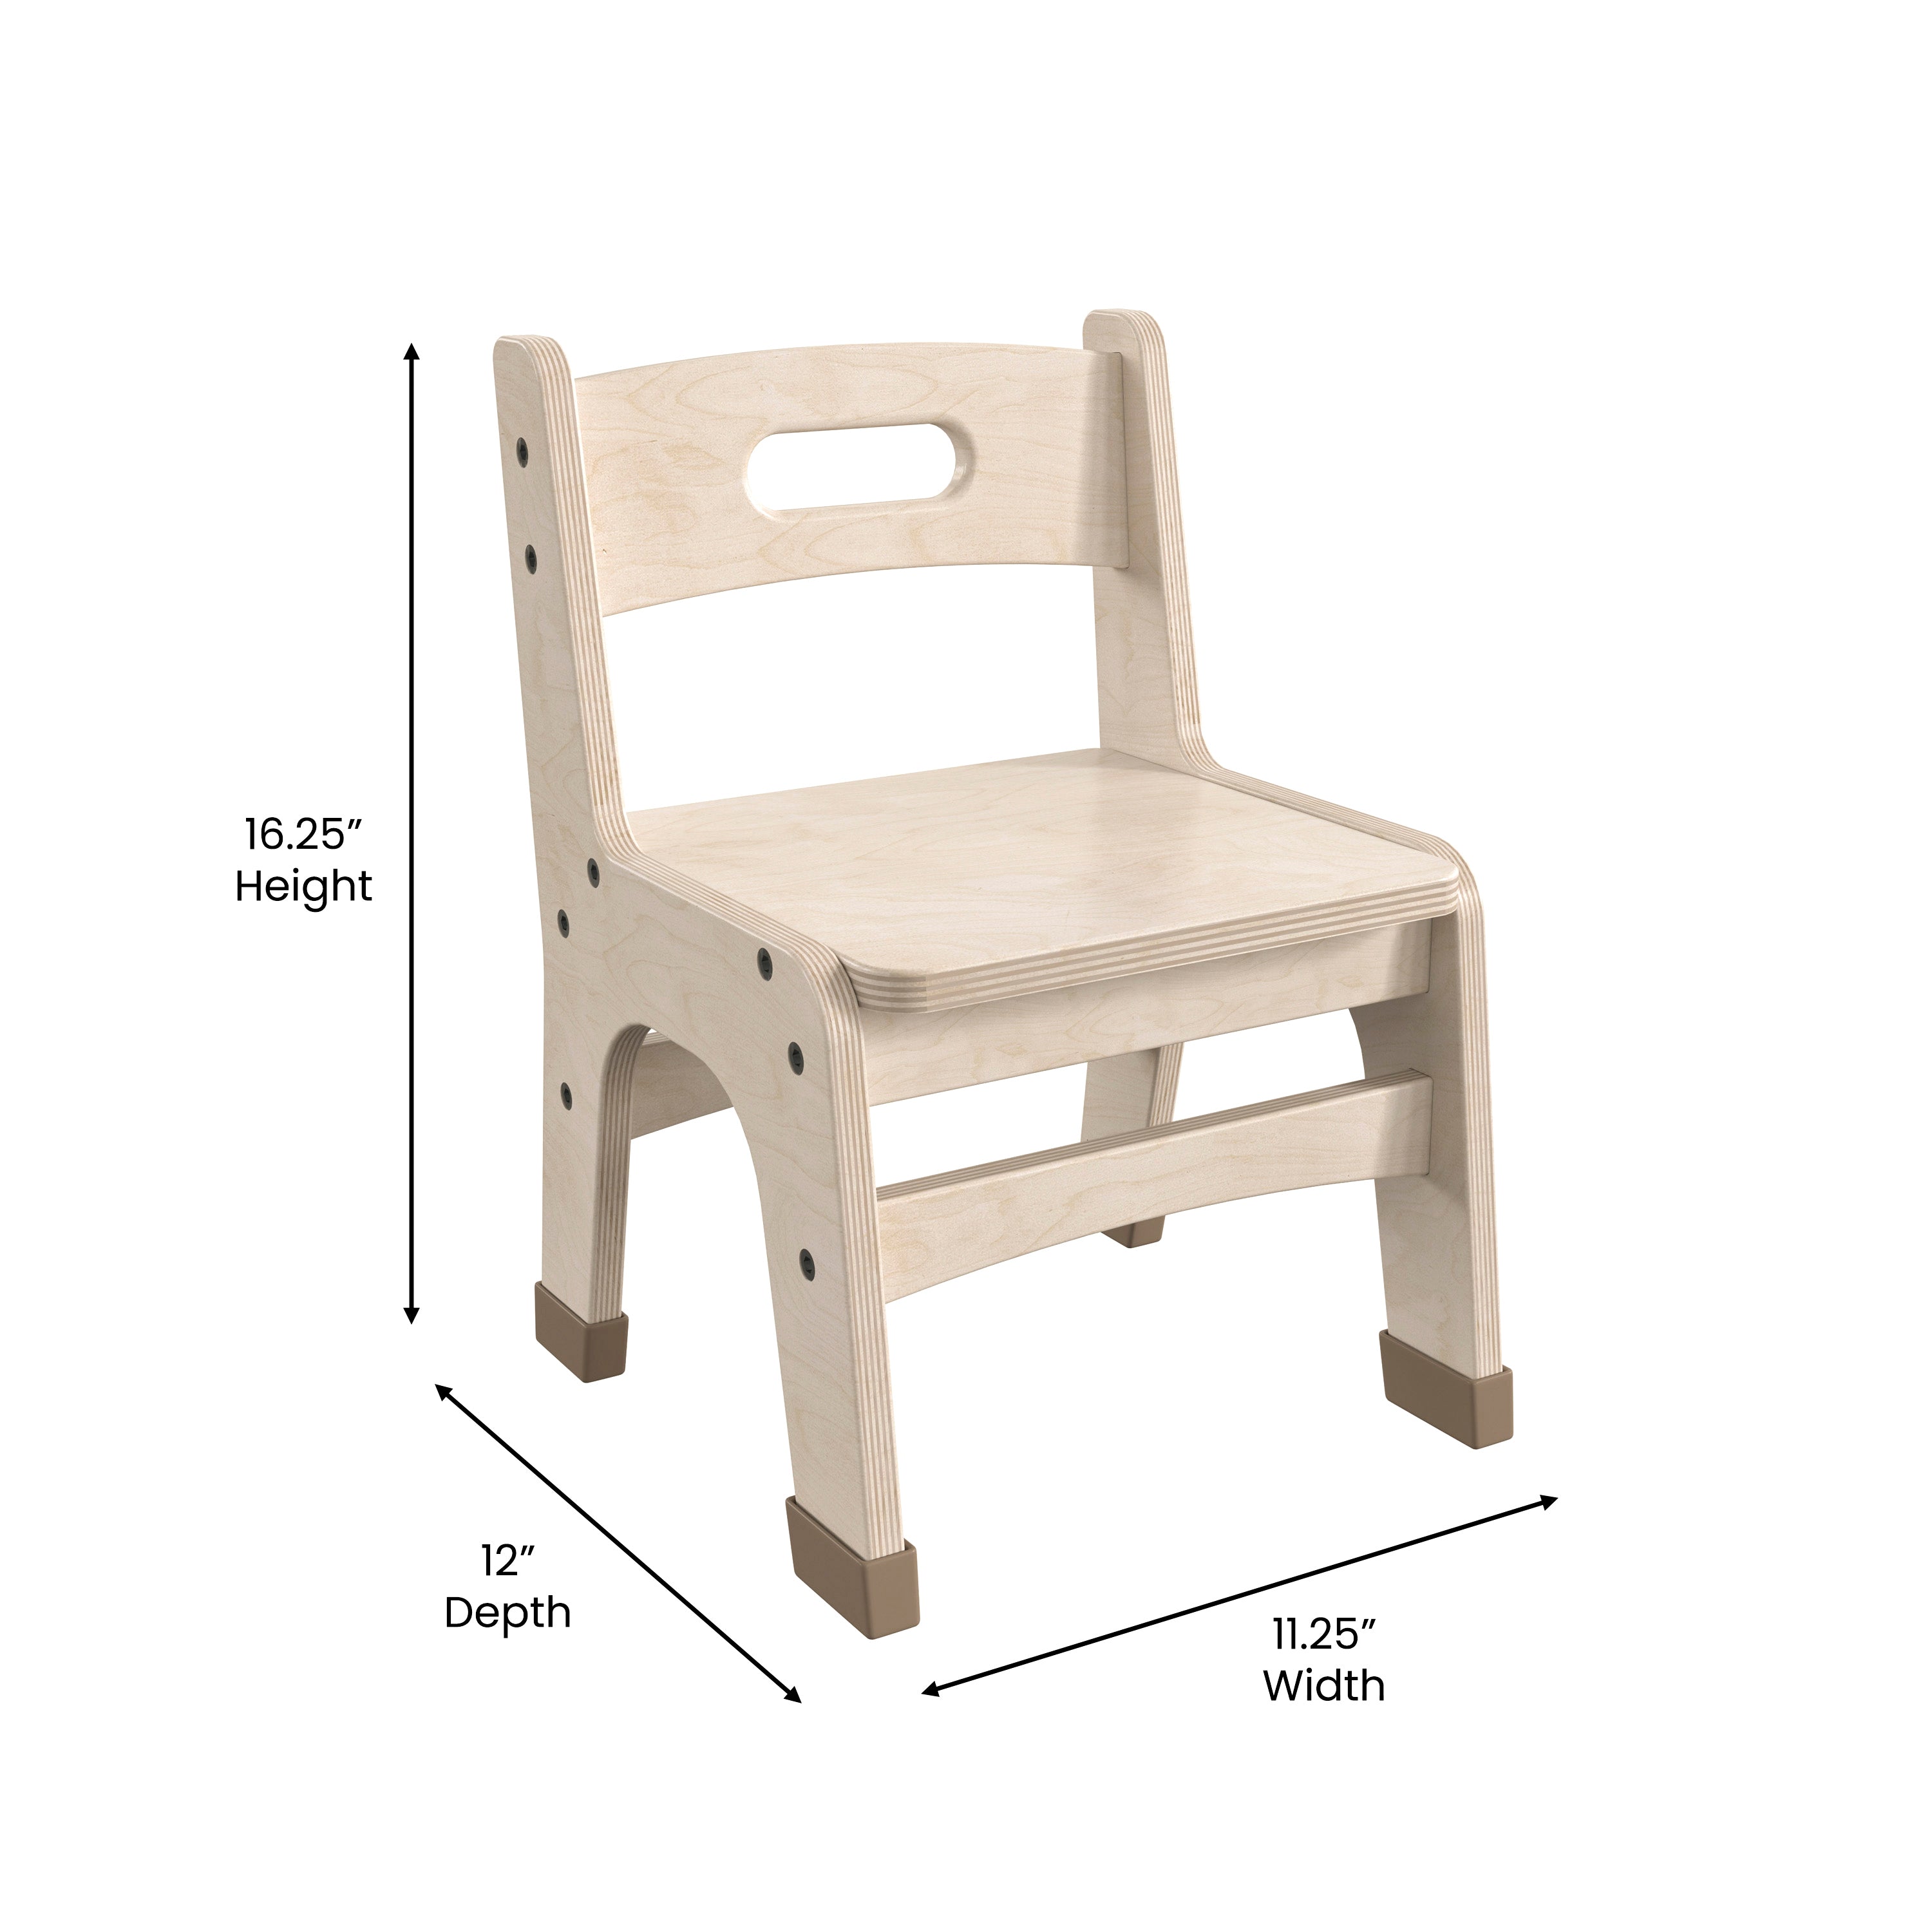 Bright Beginnings Set of 2 Commercial Grade Wooden Classroom Chairs with Non-Slip Foot Caps and Built-In Carrying Handle-Classroom Chair-Flash Furniture-Wall2Wall Furnishings